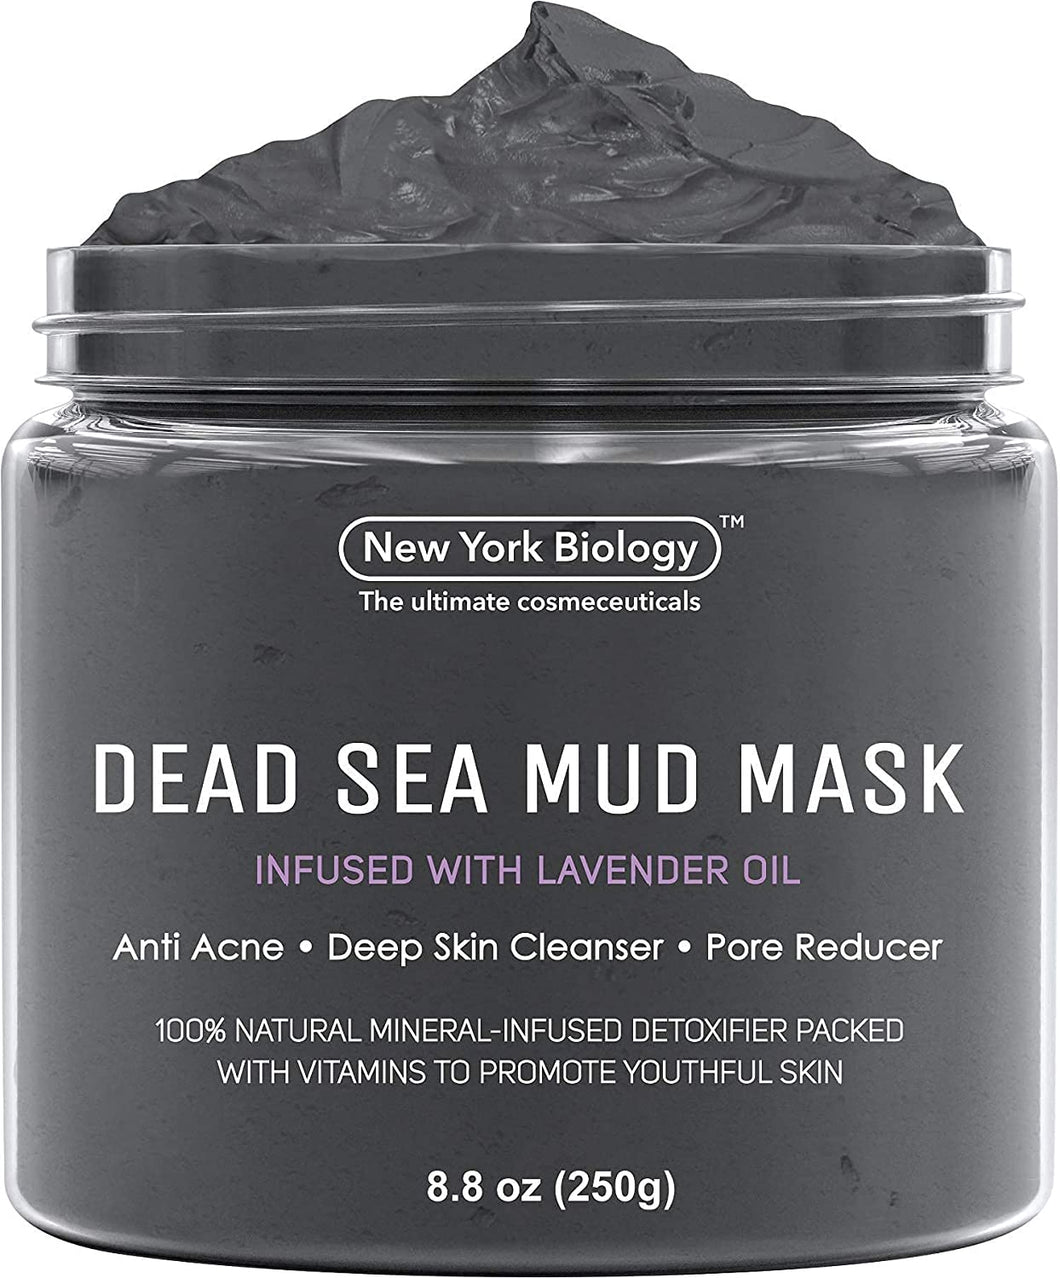 Dead Sea Mud Mask Infused With Lavender Oil